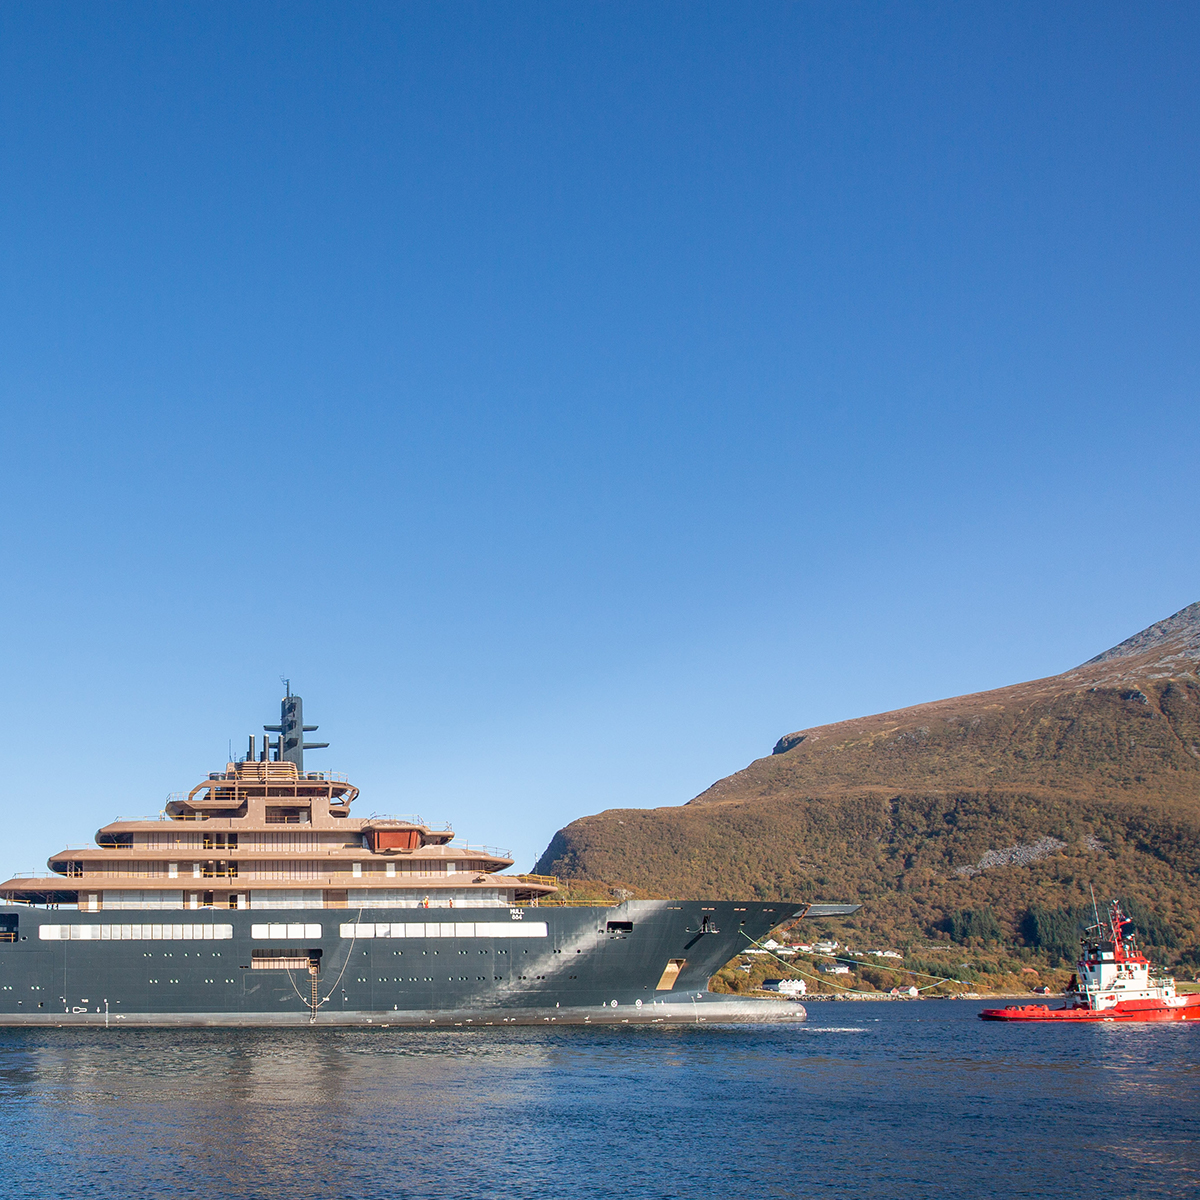 REV Ocean – much more than an expedition yacht